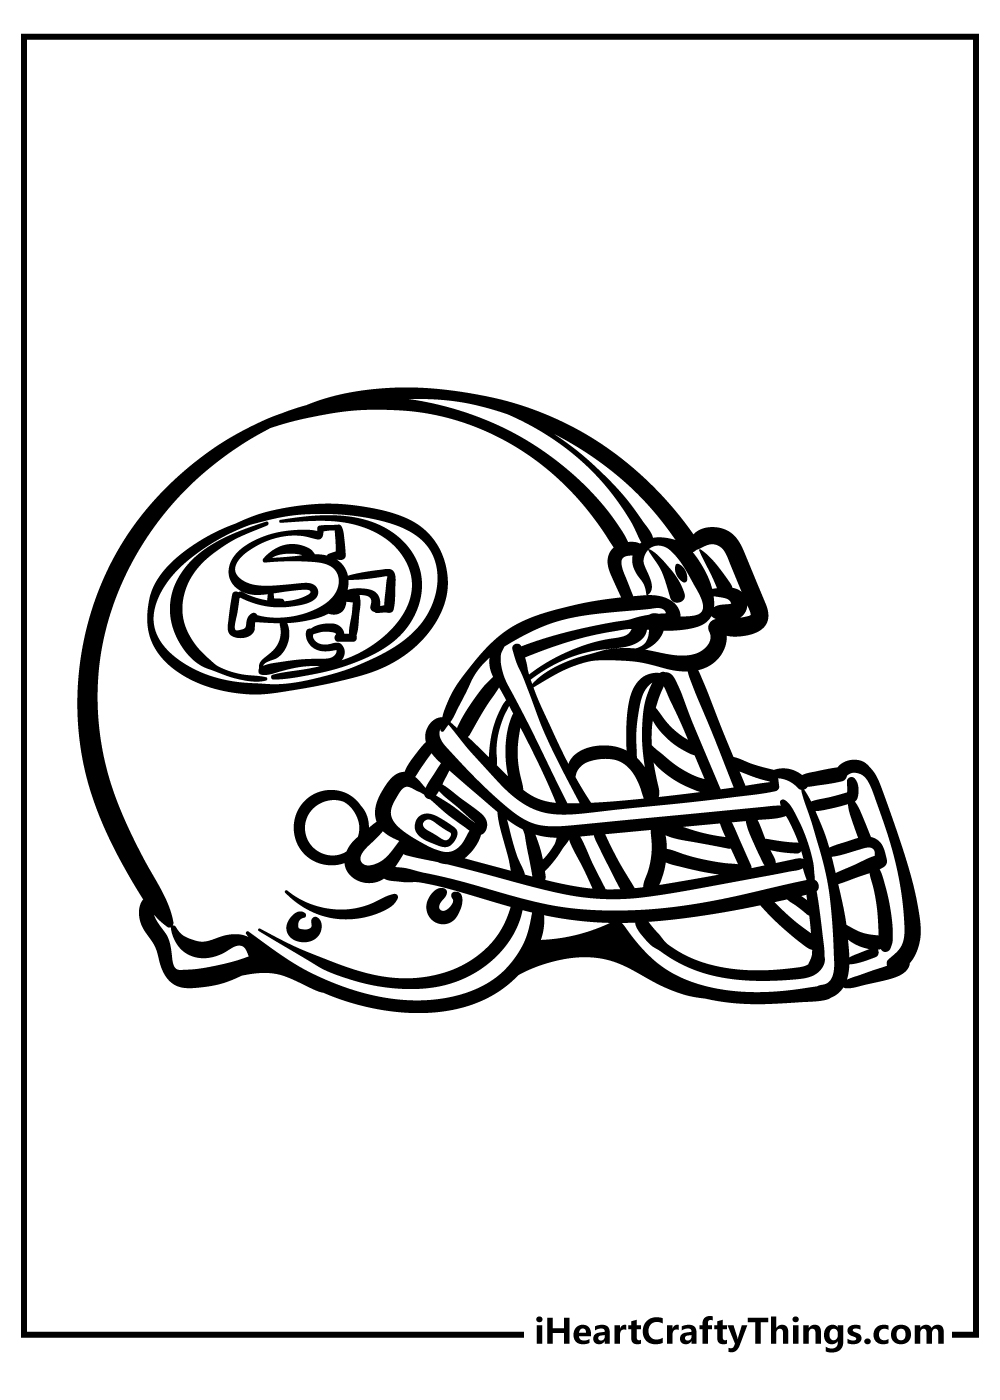 Football Coloring Pages for preschoolers free printable